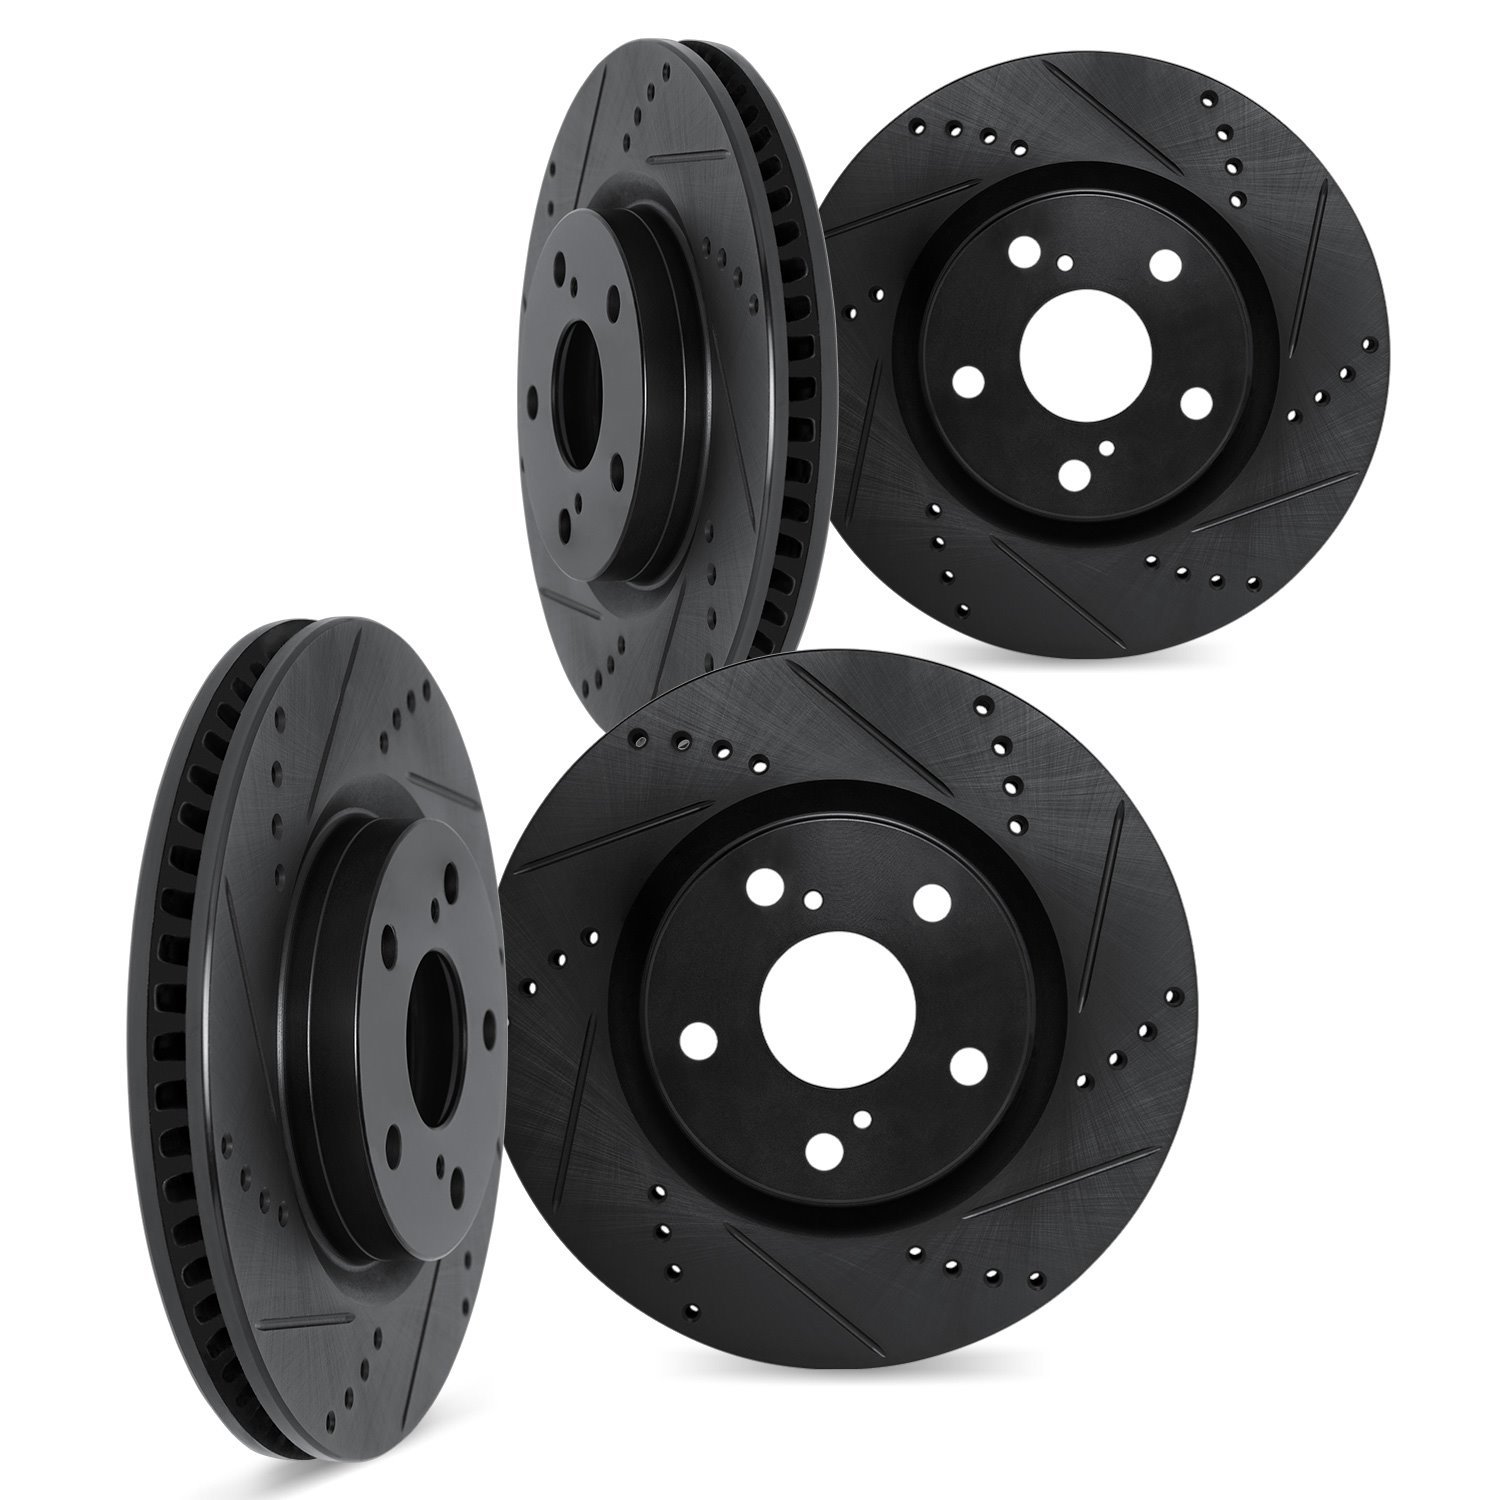 8004-67084 Drilled/Slotted Brake Rotors [Black], Fits Select Multiple Makes/Models, Position: Front and Rear